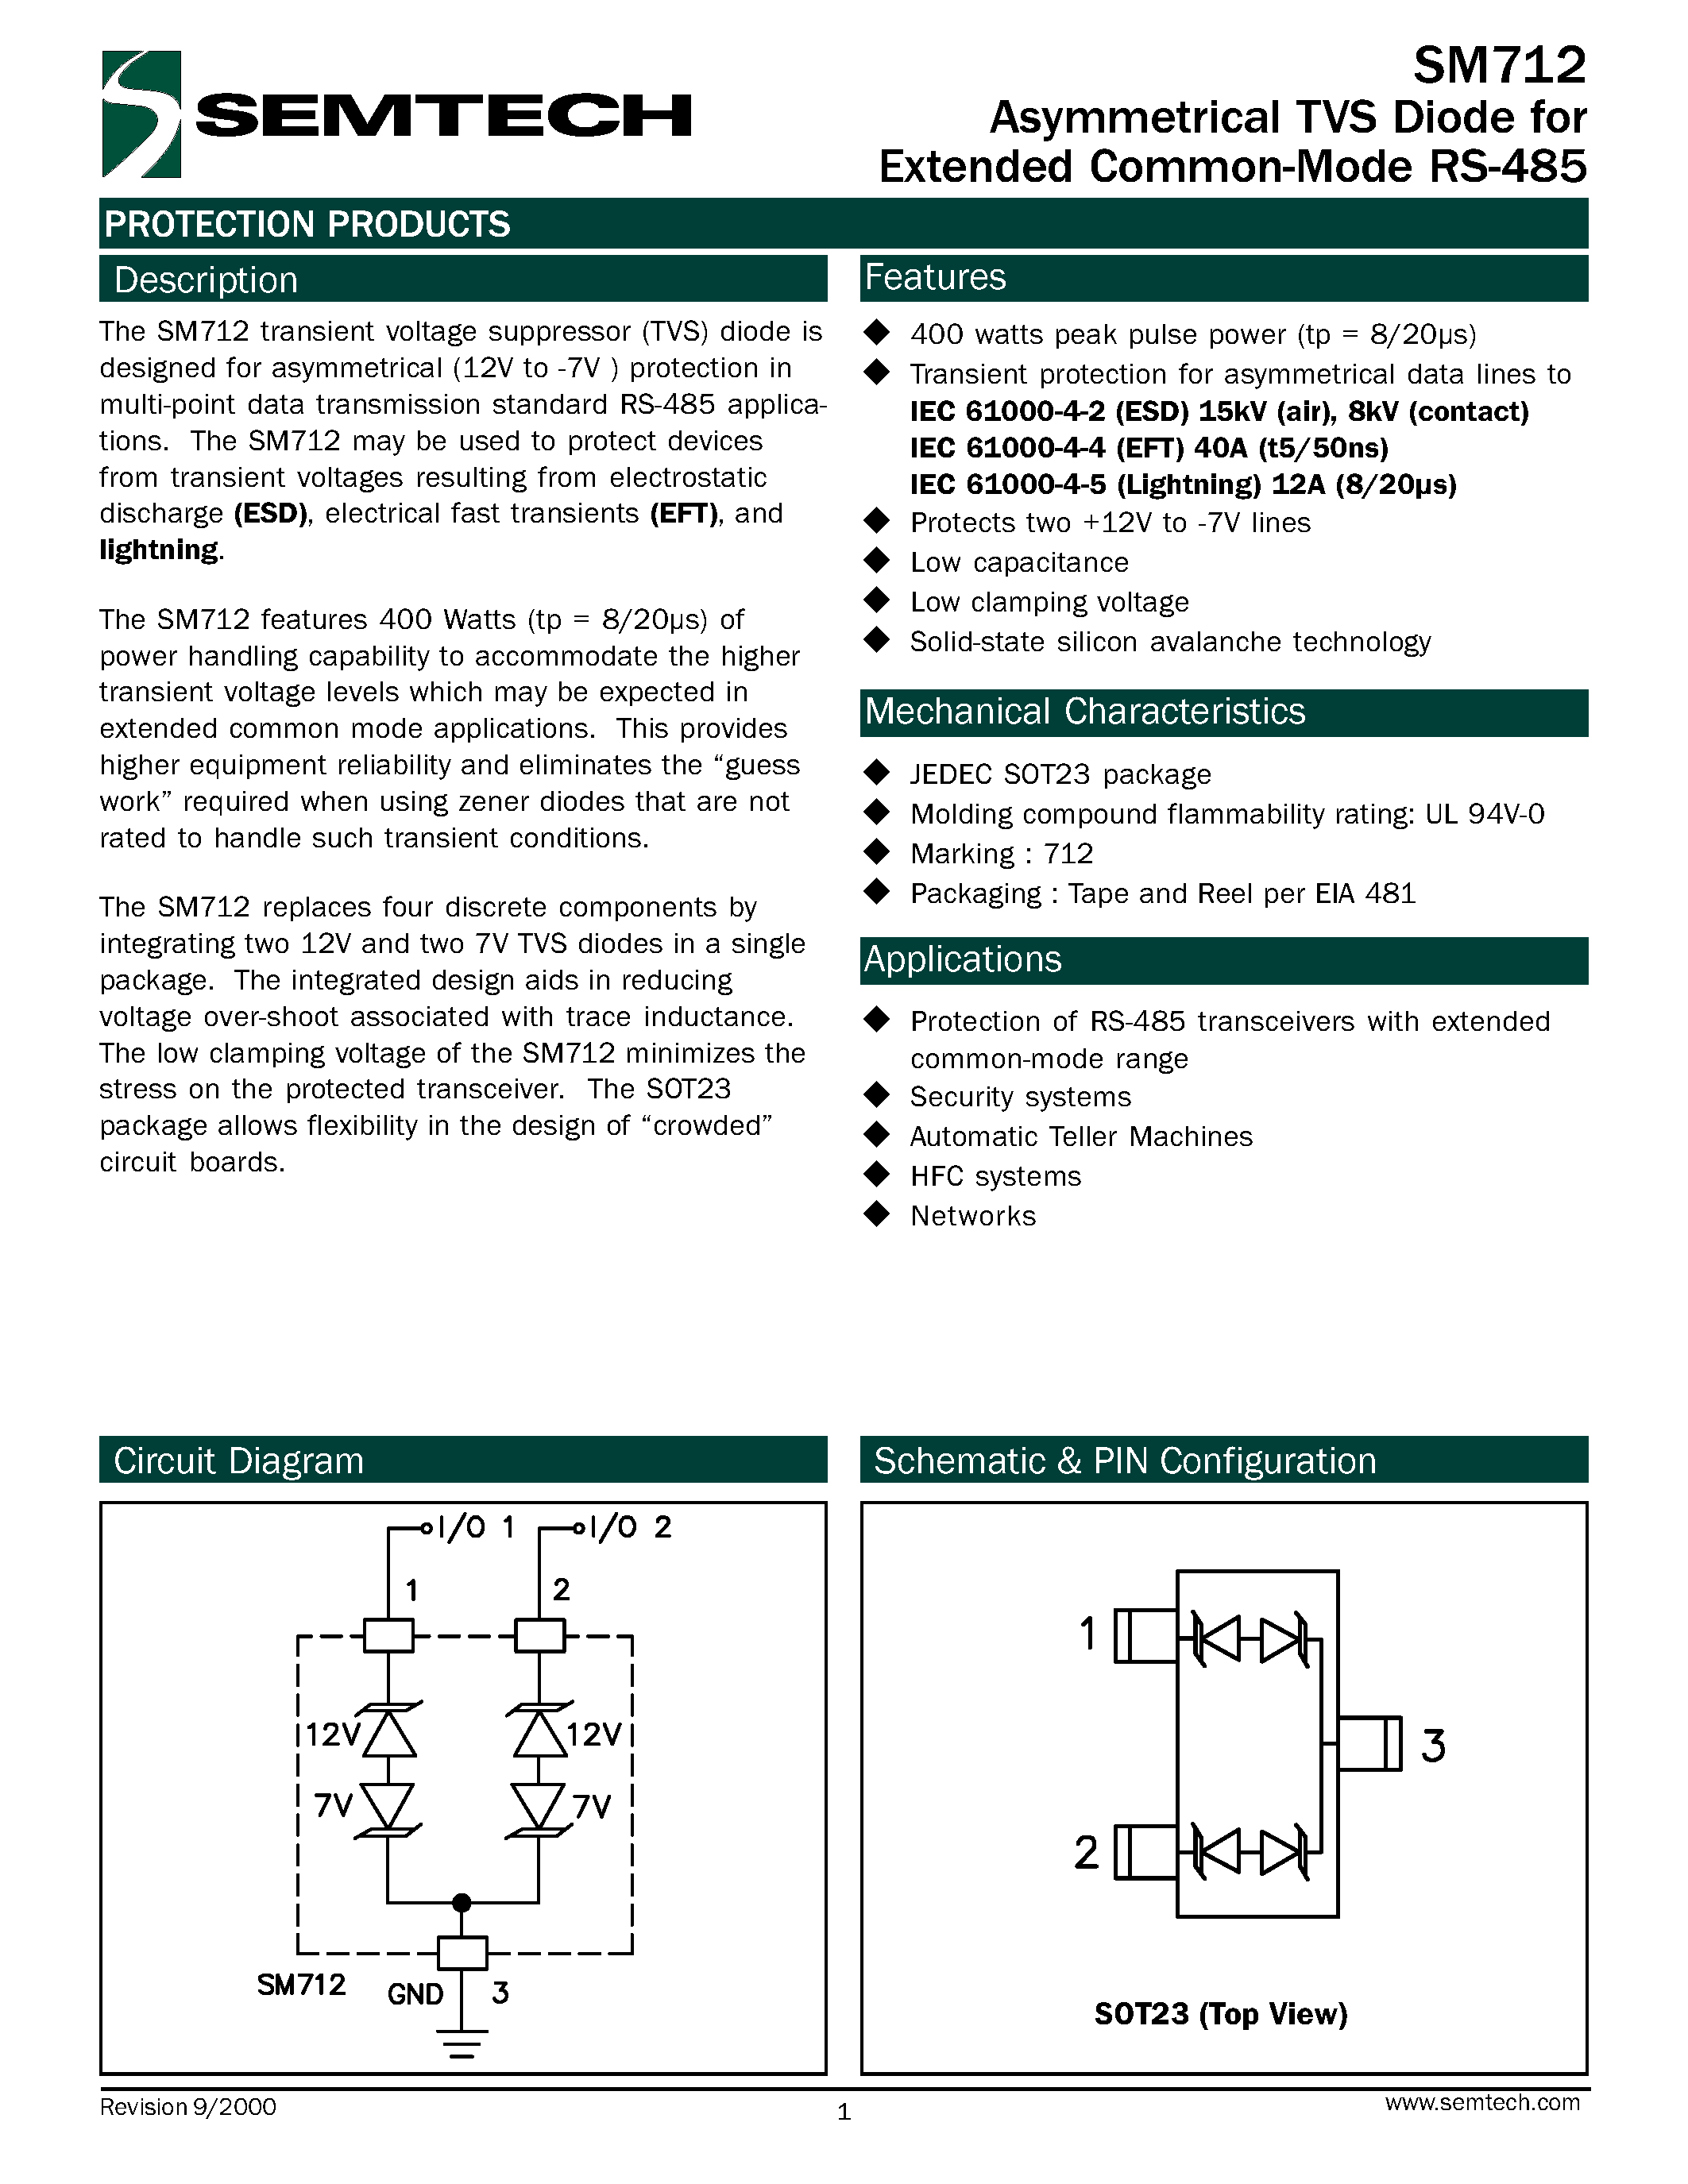 Datasheet SM712TG - Asymmetrical TVS Diode for Extended Common-Mode RS-485 page 1